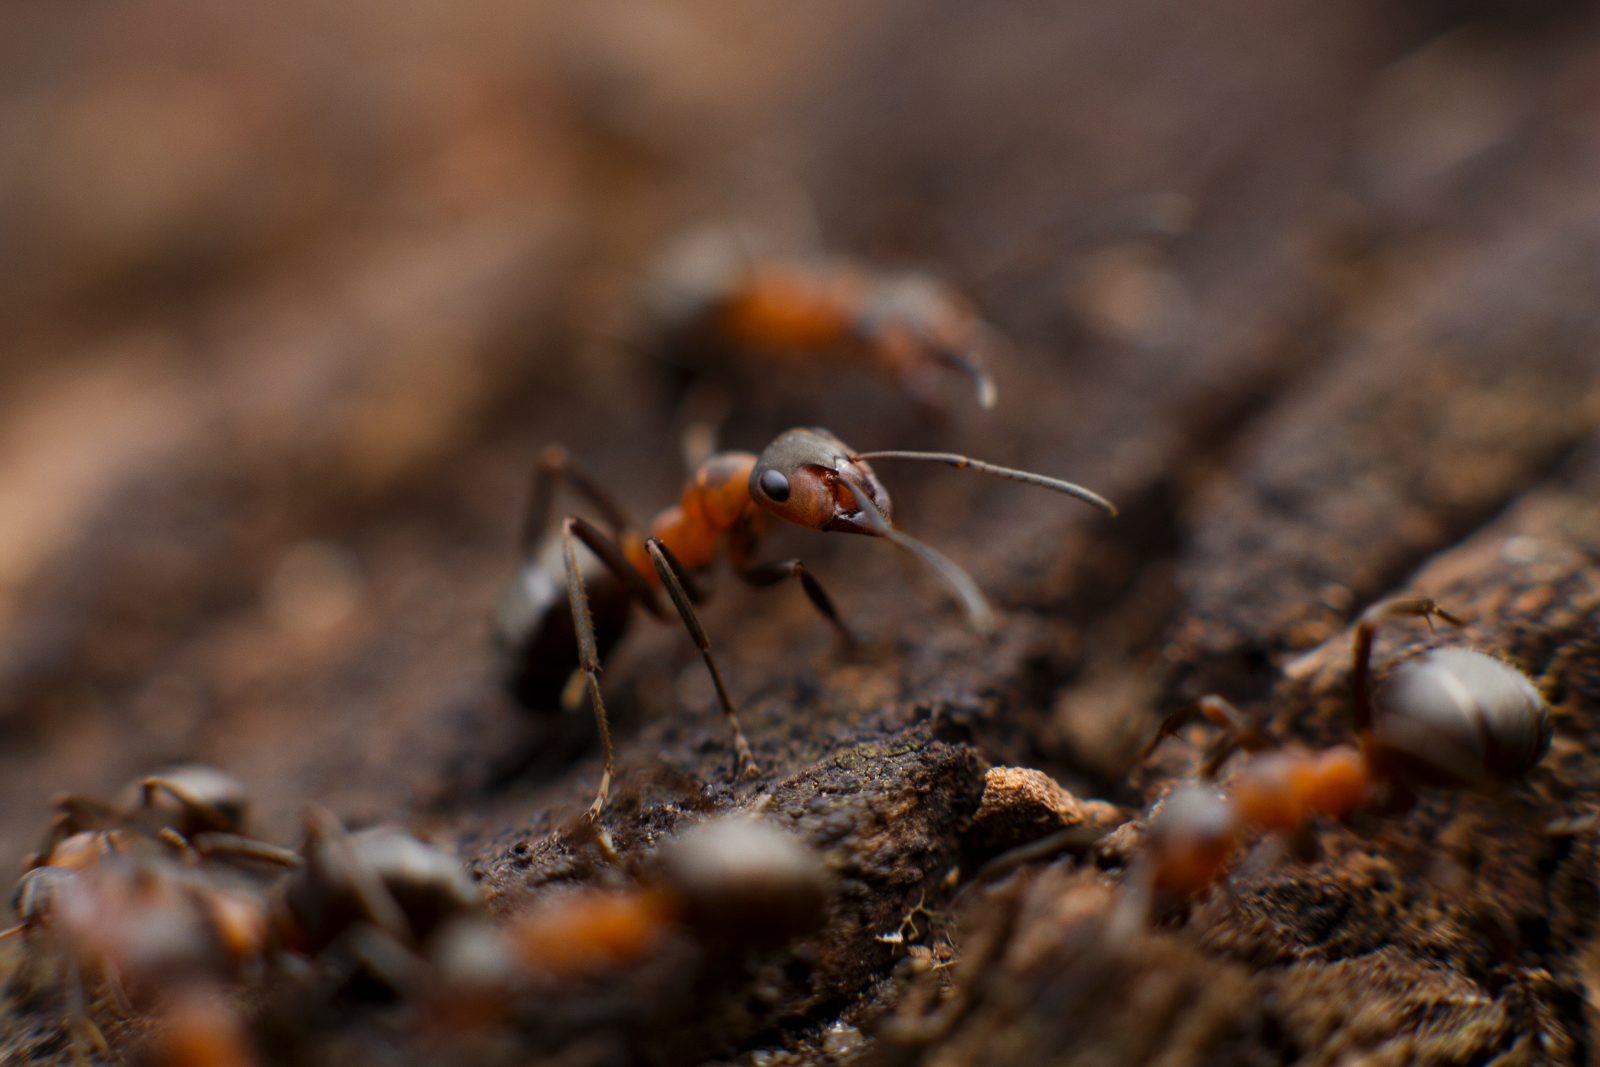 Ants and the Superintelligence